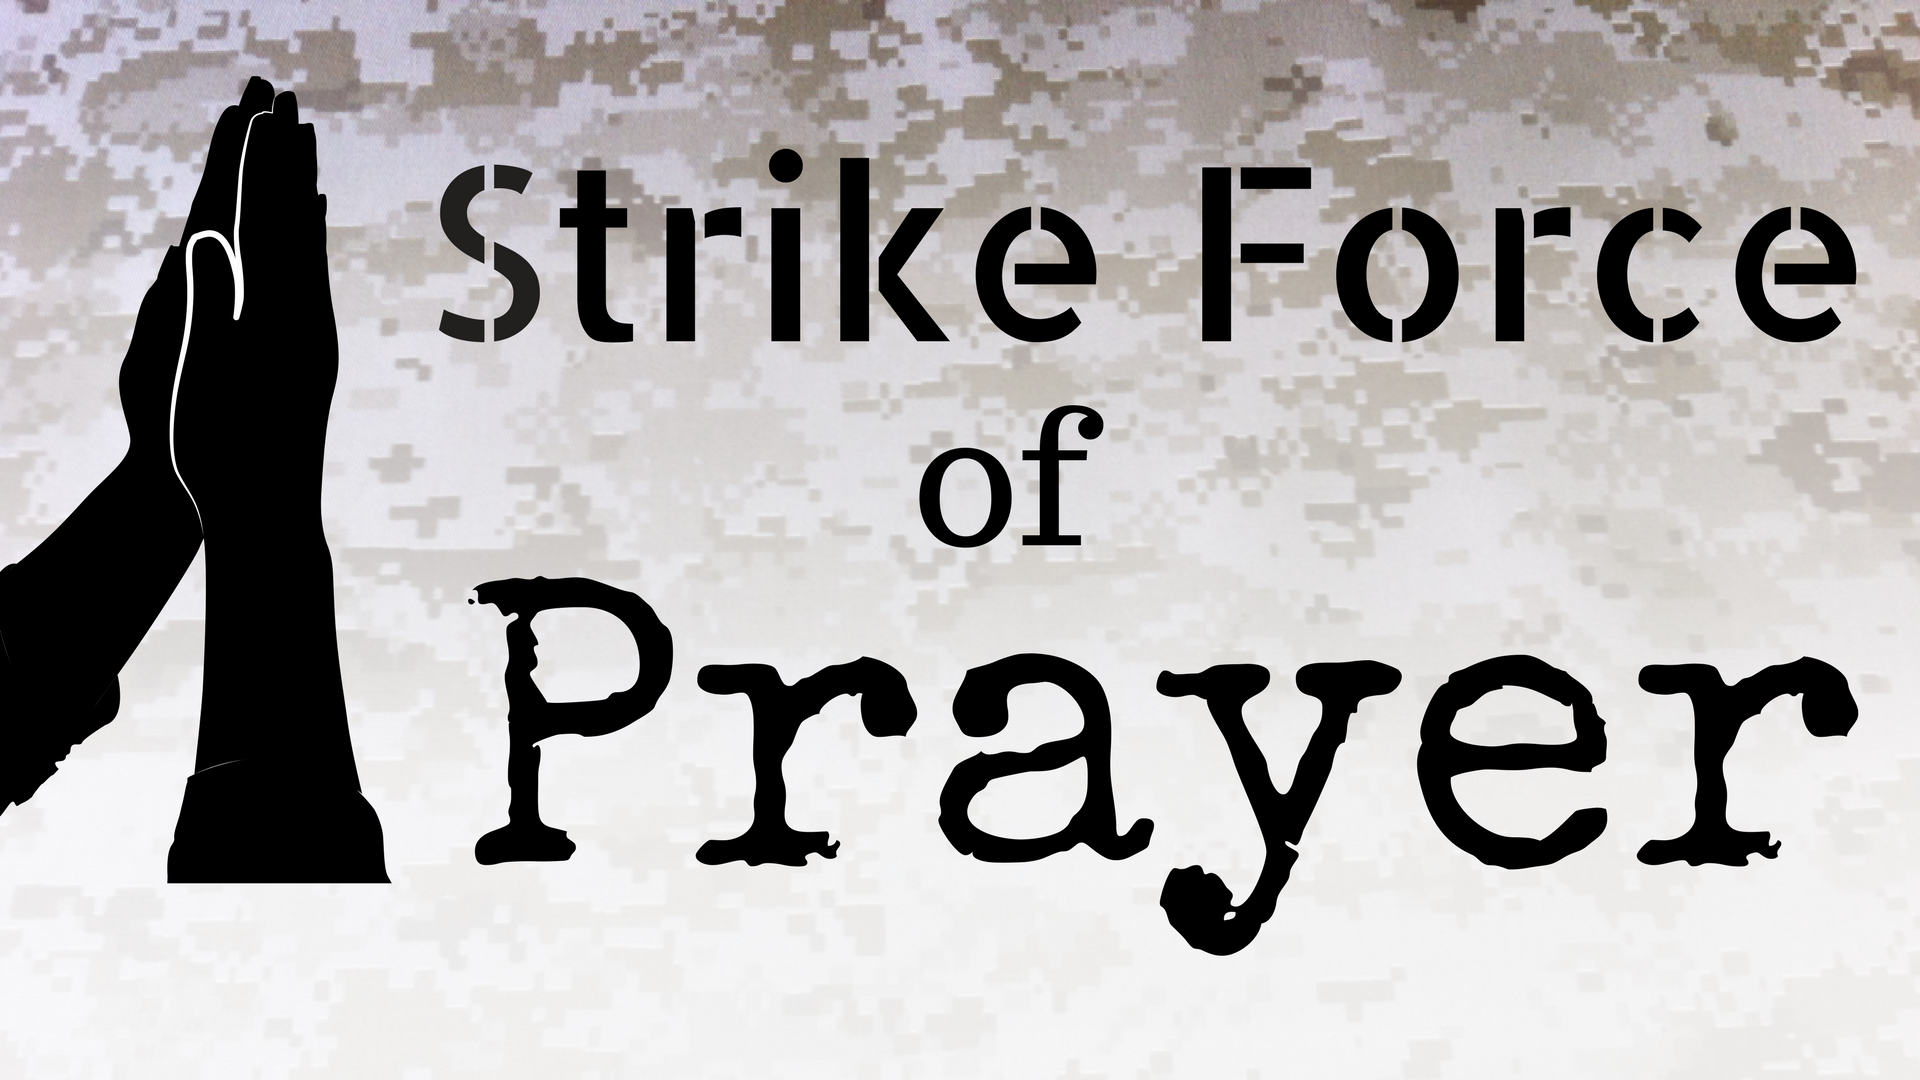 Strike Force of Prayer meets two days a week to pray for the leaders of our country.